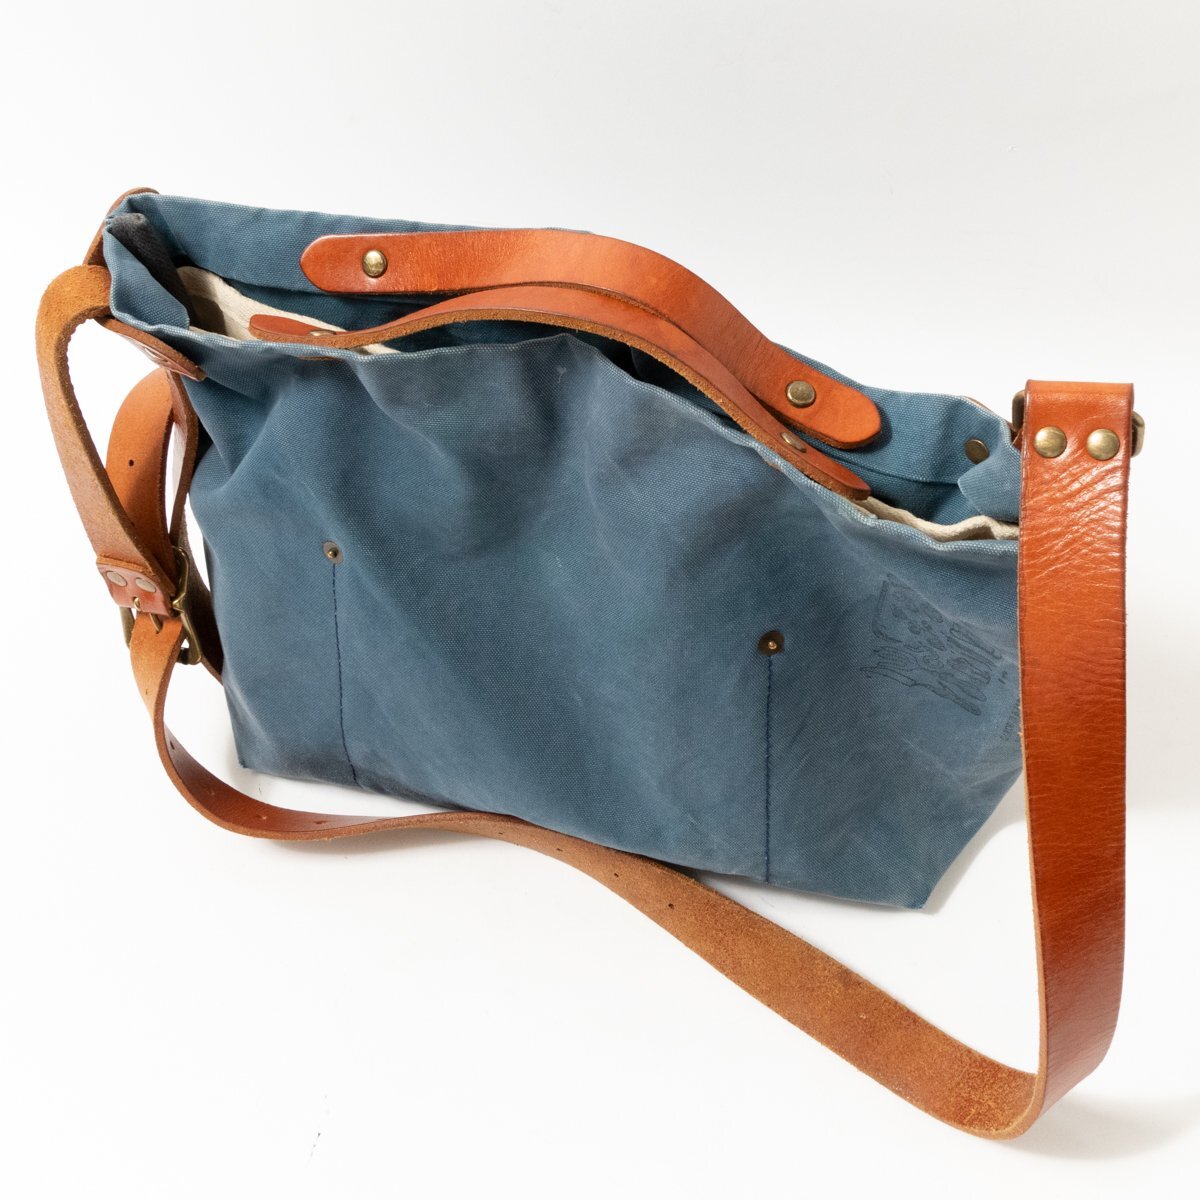 SUOLO shoulder bag so-ro blue group military canvas leather -tsu in stock diagonal .. cotton cow leather bag bag woman lady's 